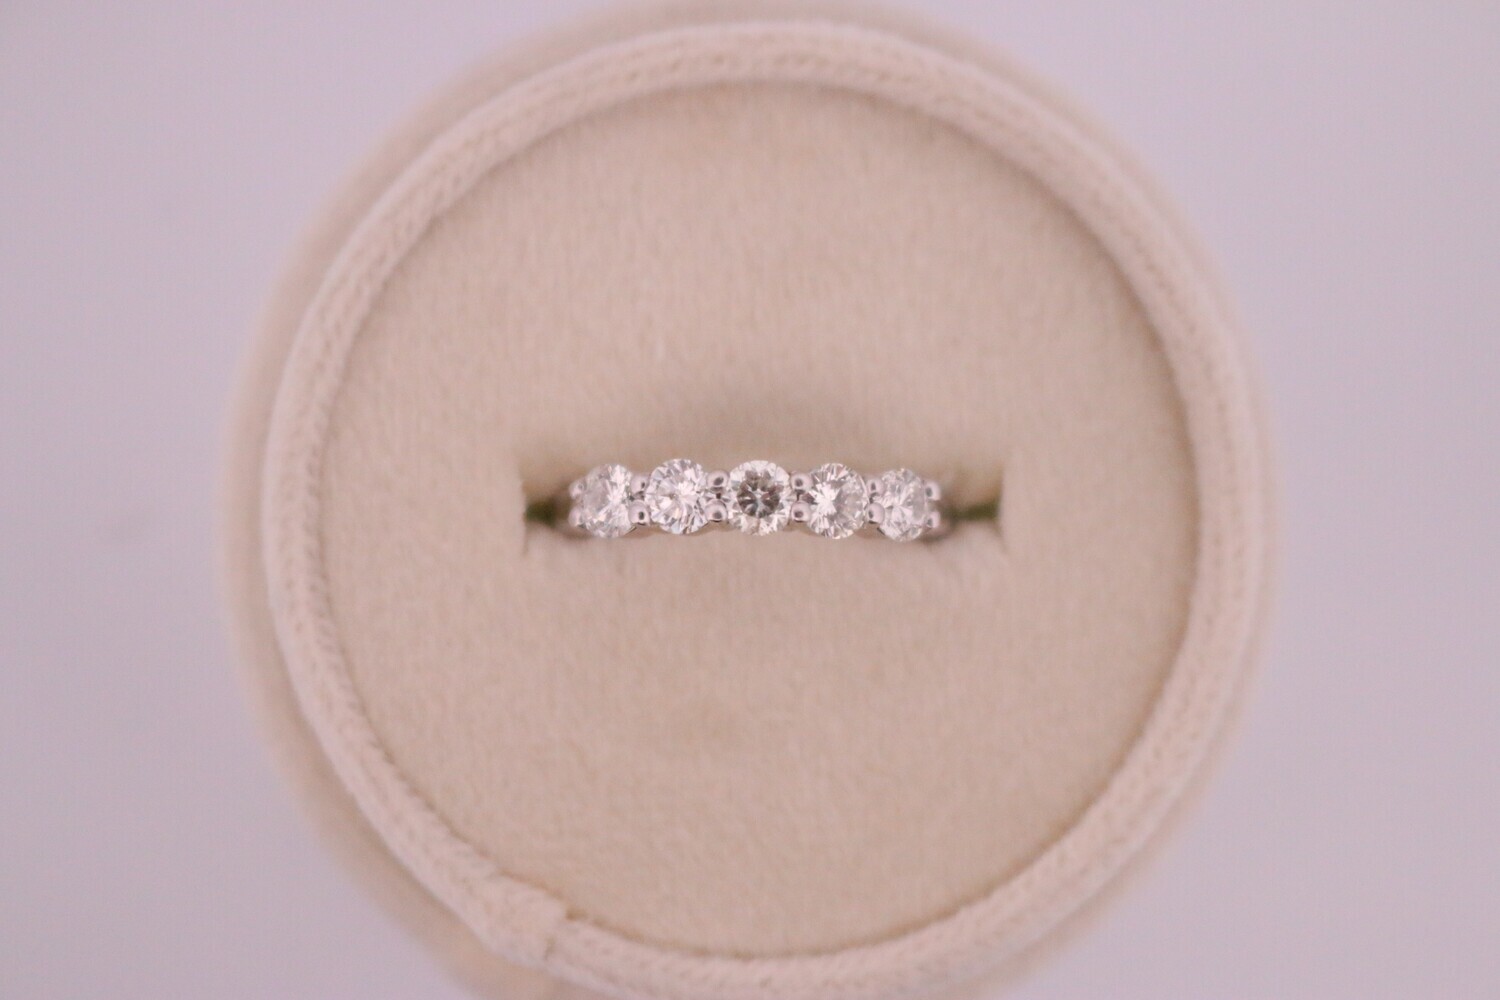 14kw 1 CTW Shared Prong Five Diamond Band I1 IJ 3.7 grams